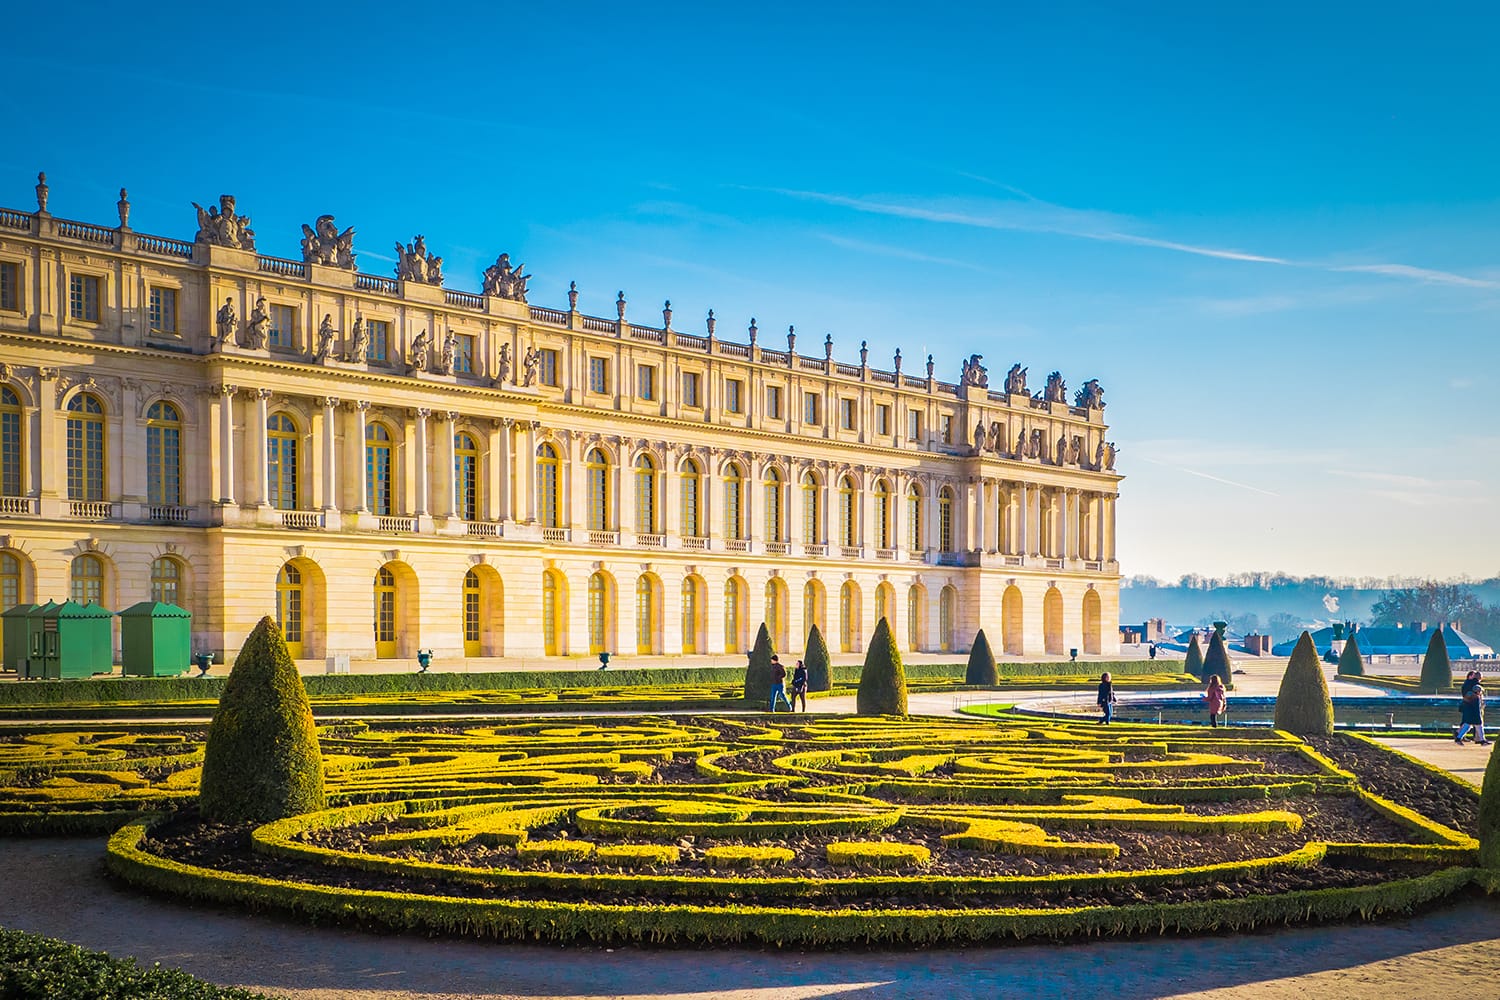 Famous Palace of Versailles with beautiful gardens outdoors near Paris, France. The Palace Versailles was a royal chateau and was added to the UNESCO list of World Heritage Sites.